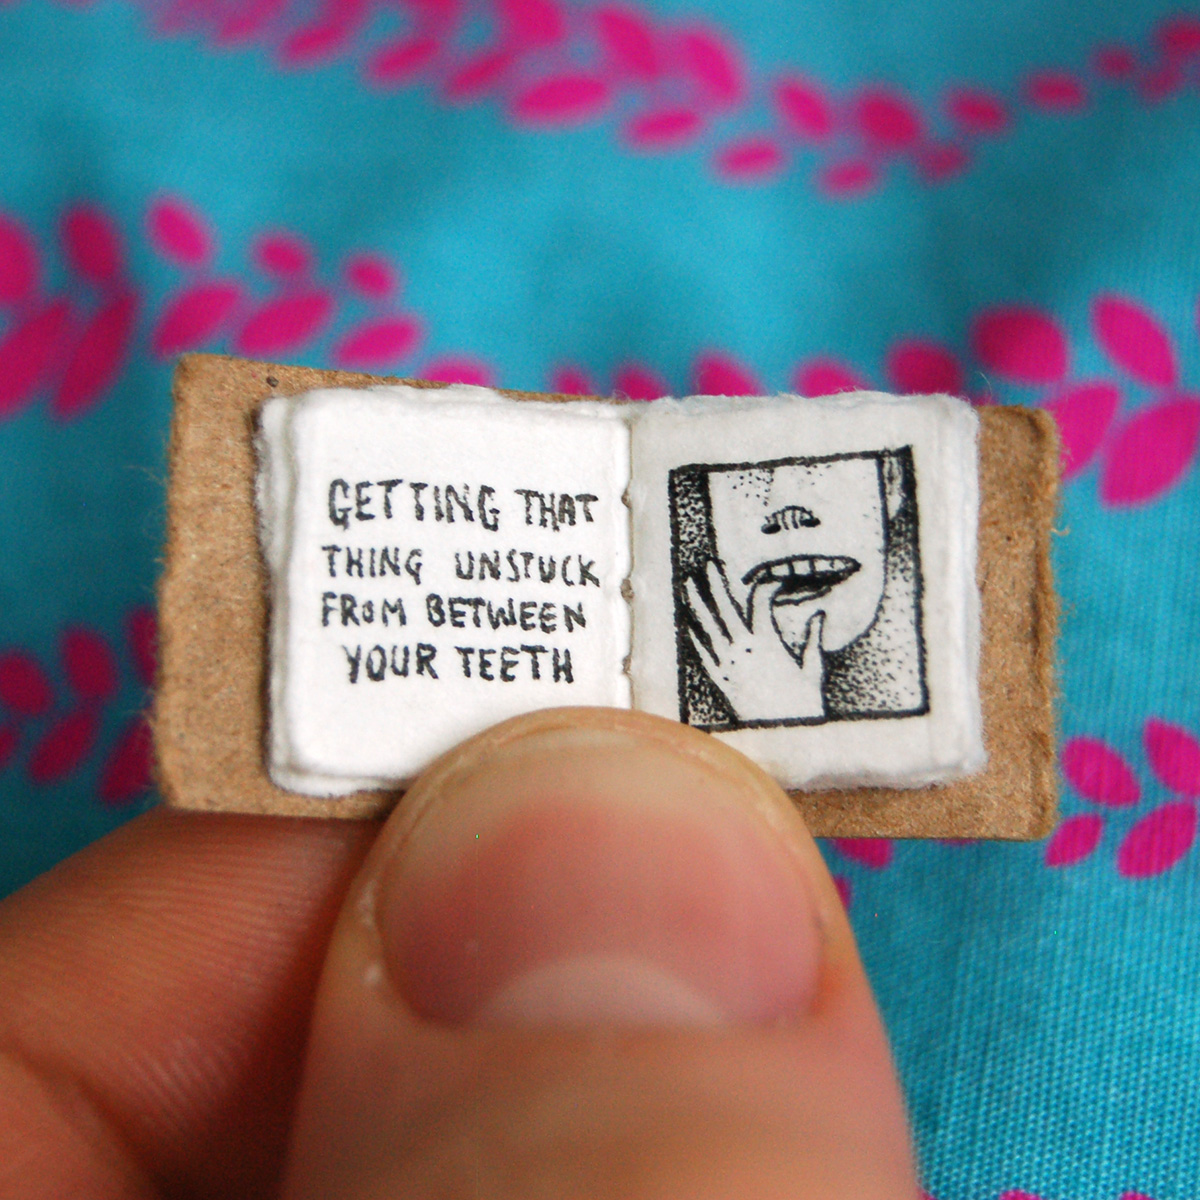 This Pin-Sized Book Reminds Us Of Life’s Little Pleasures